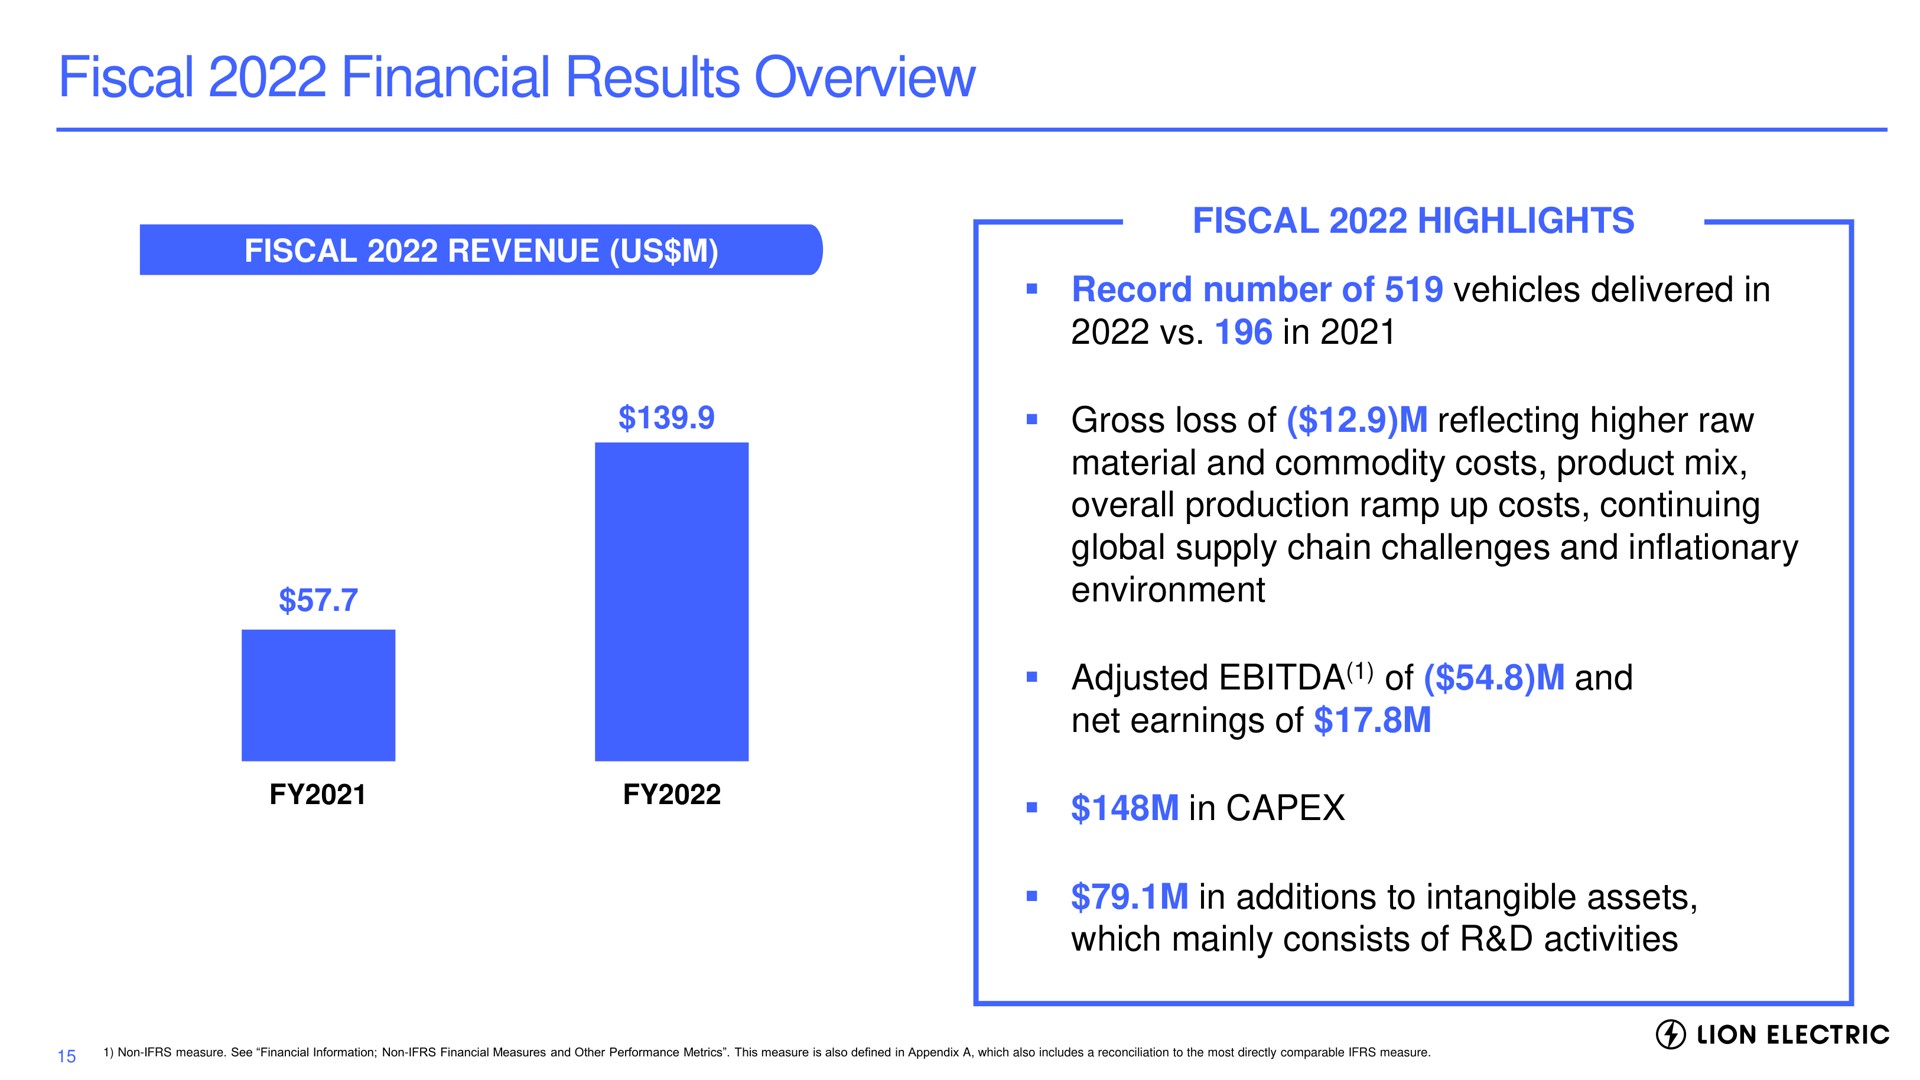 fiscal financial results overview fiscal highlights record number of vehicles delivered in in gross loss of reflecting higher raw material and commodity costs product mix overall production ramp up costs continuing global supply chain challenges and inflationary environment adjusted of and net earnings of in in additions to intangible assets which mainly consists of activities lion electric | Lion Electric